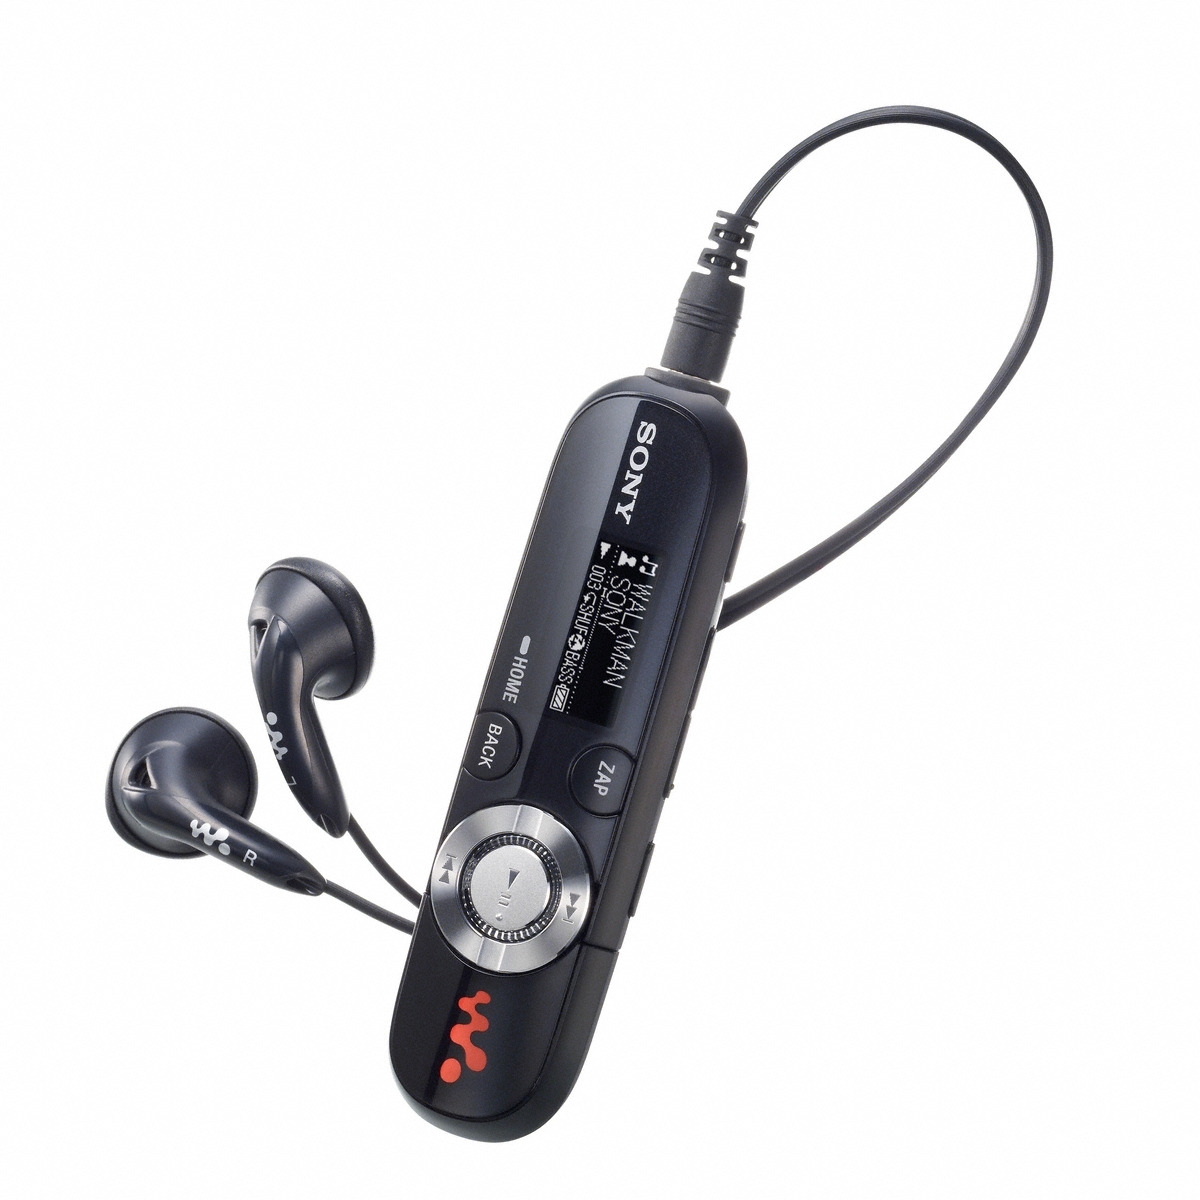 Accessories   Players on Sony Announces New Walkman E Series Video Mp3 Player